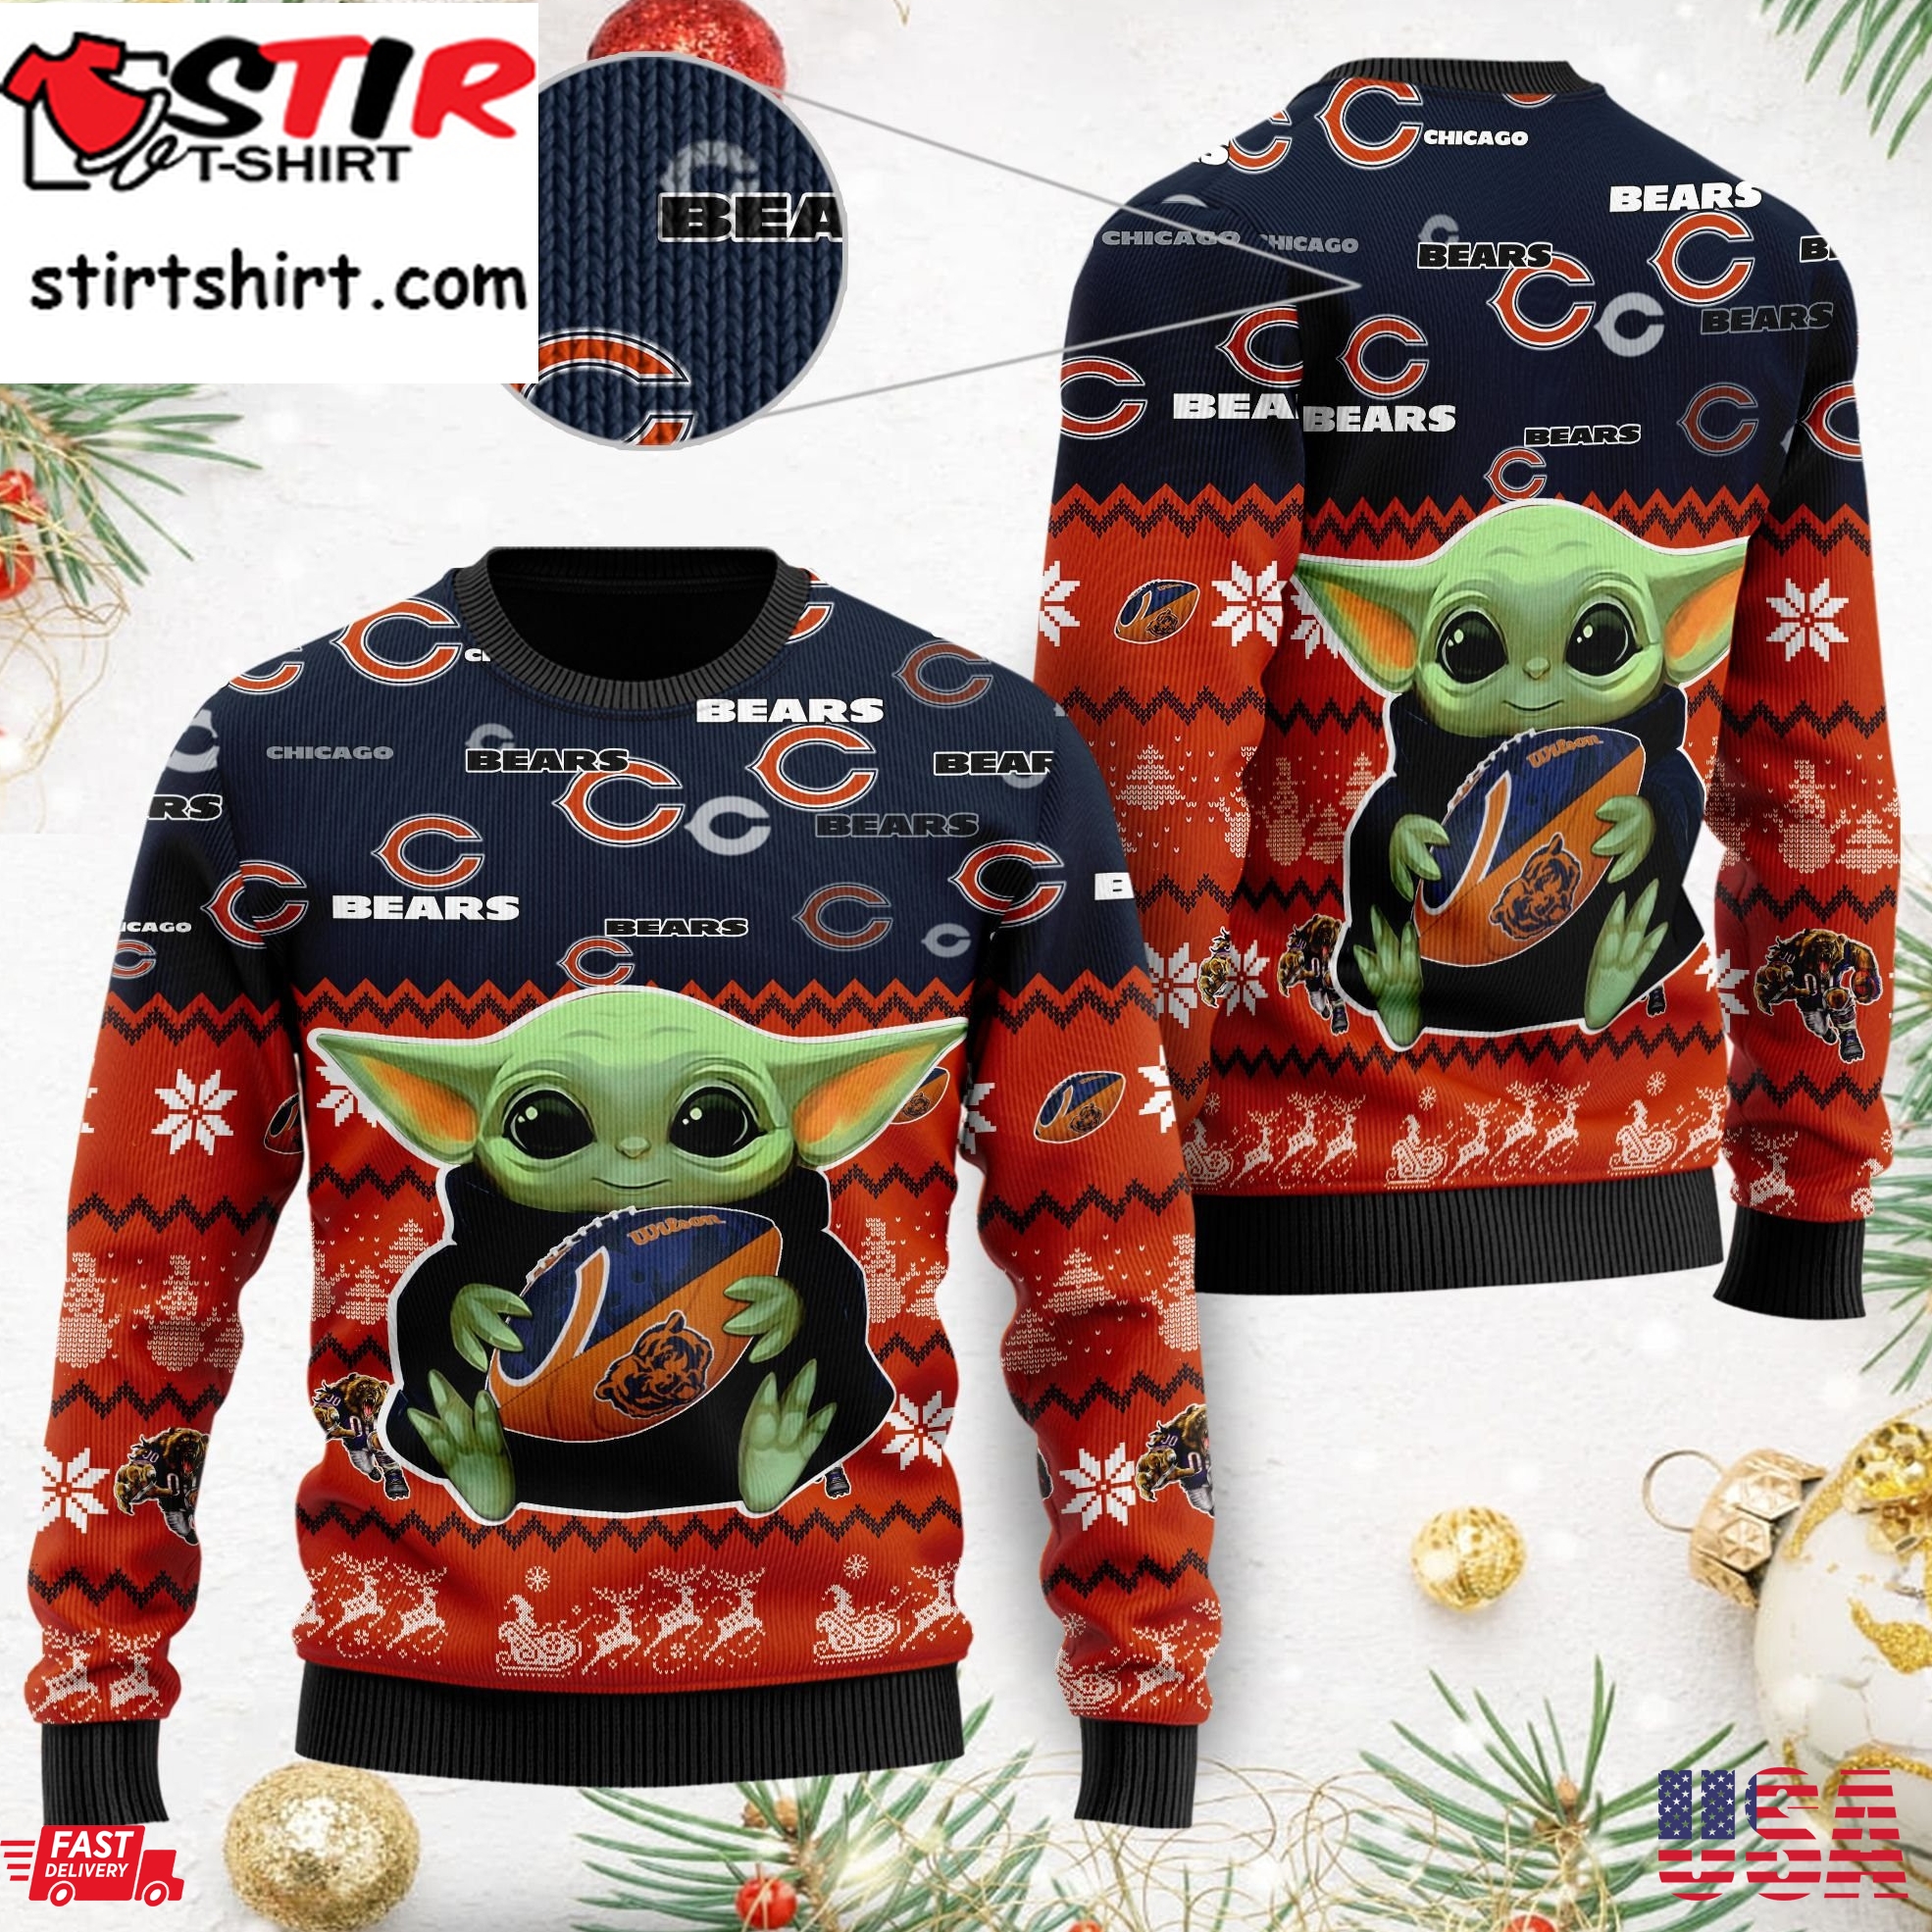 Chicago Bears Baby Yoda Shirt For American Football Fans Ugly